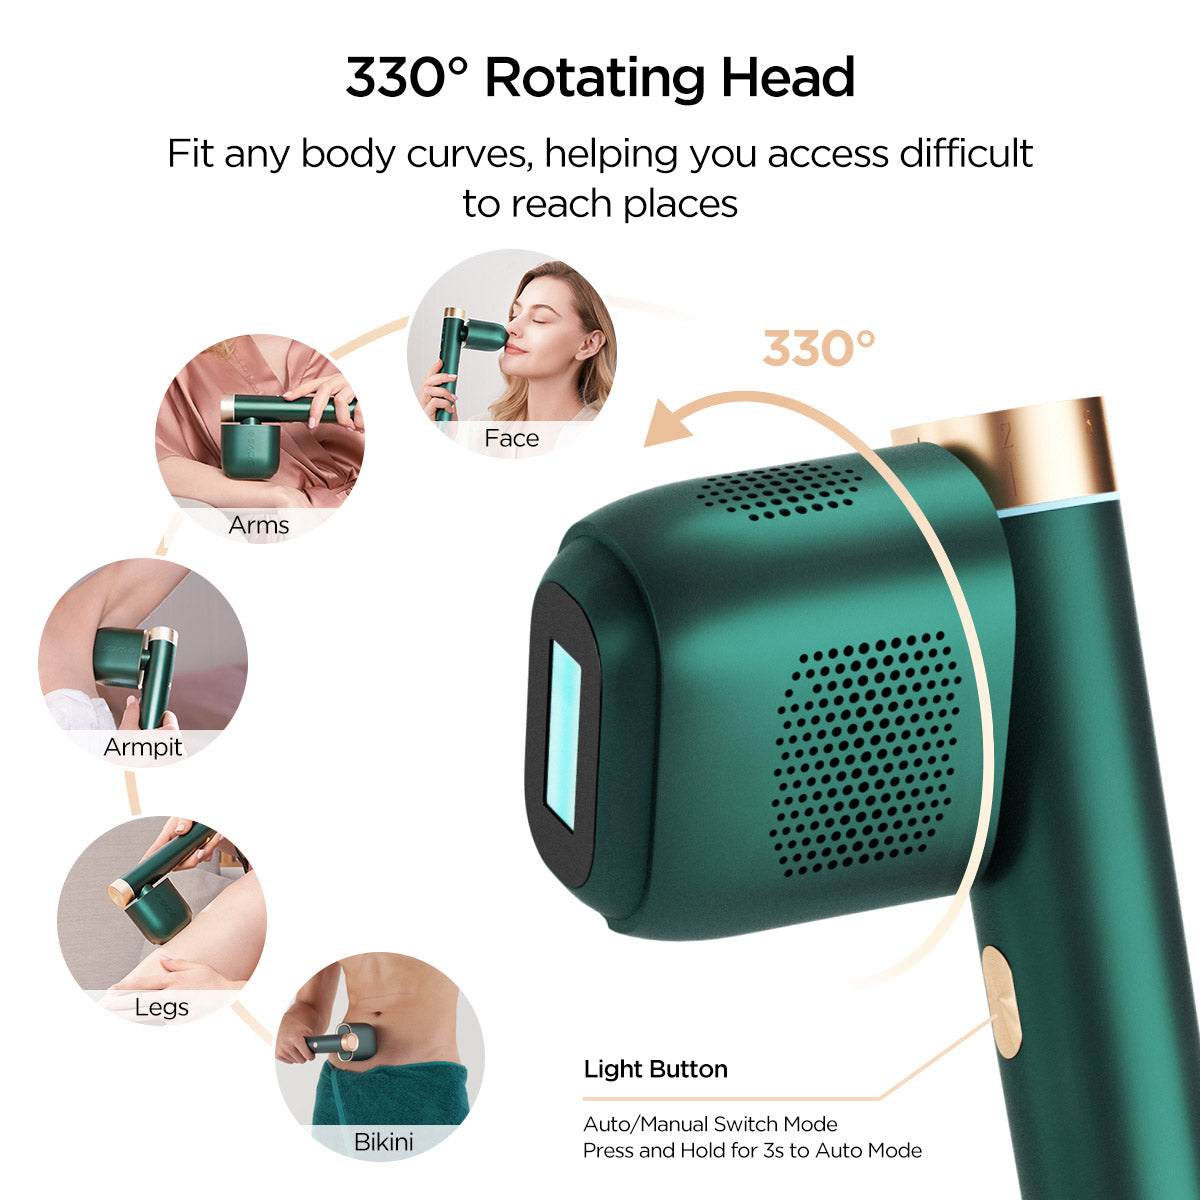 330° Rotating Head of JOVS Venus Pro ll IPL Hair Removal Device in face、arms、armpit、legs and Bikini situations